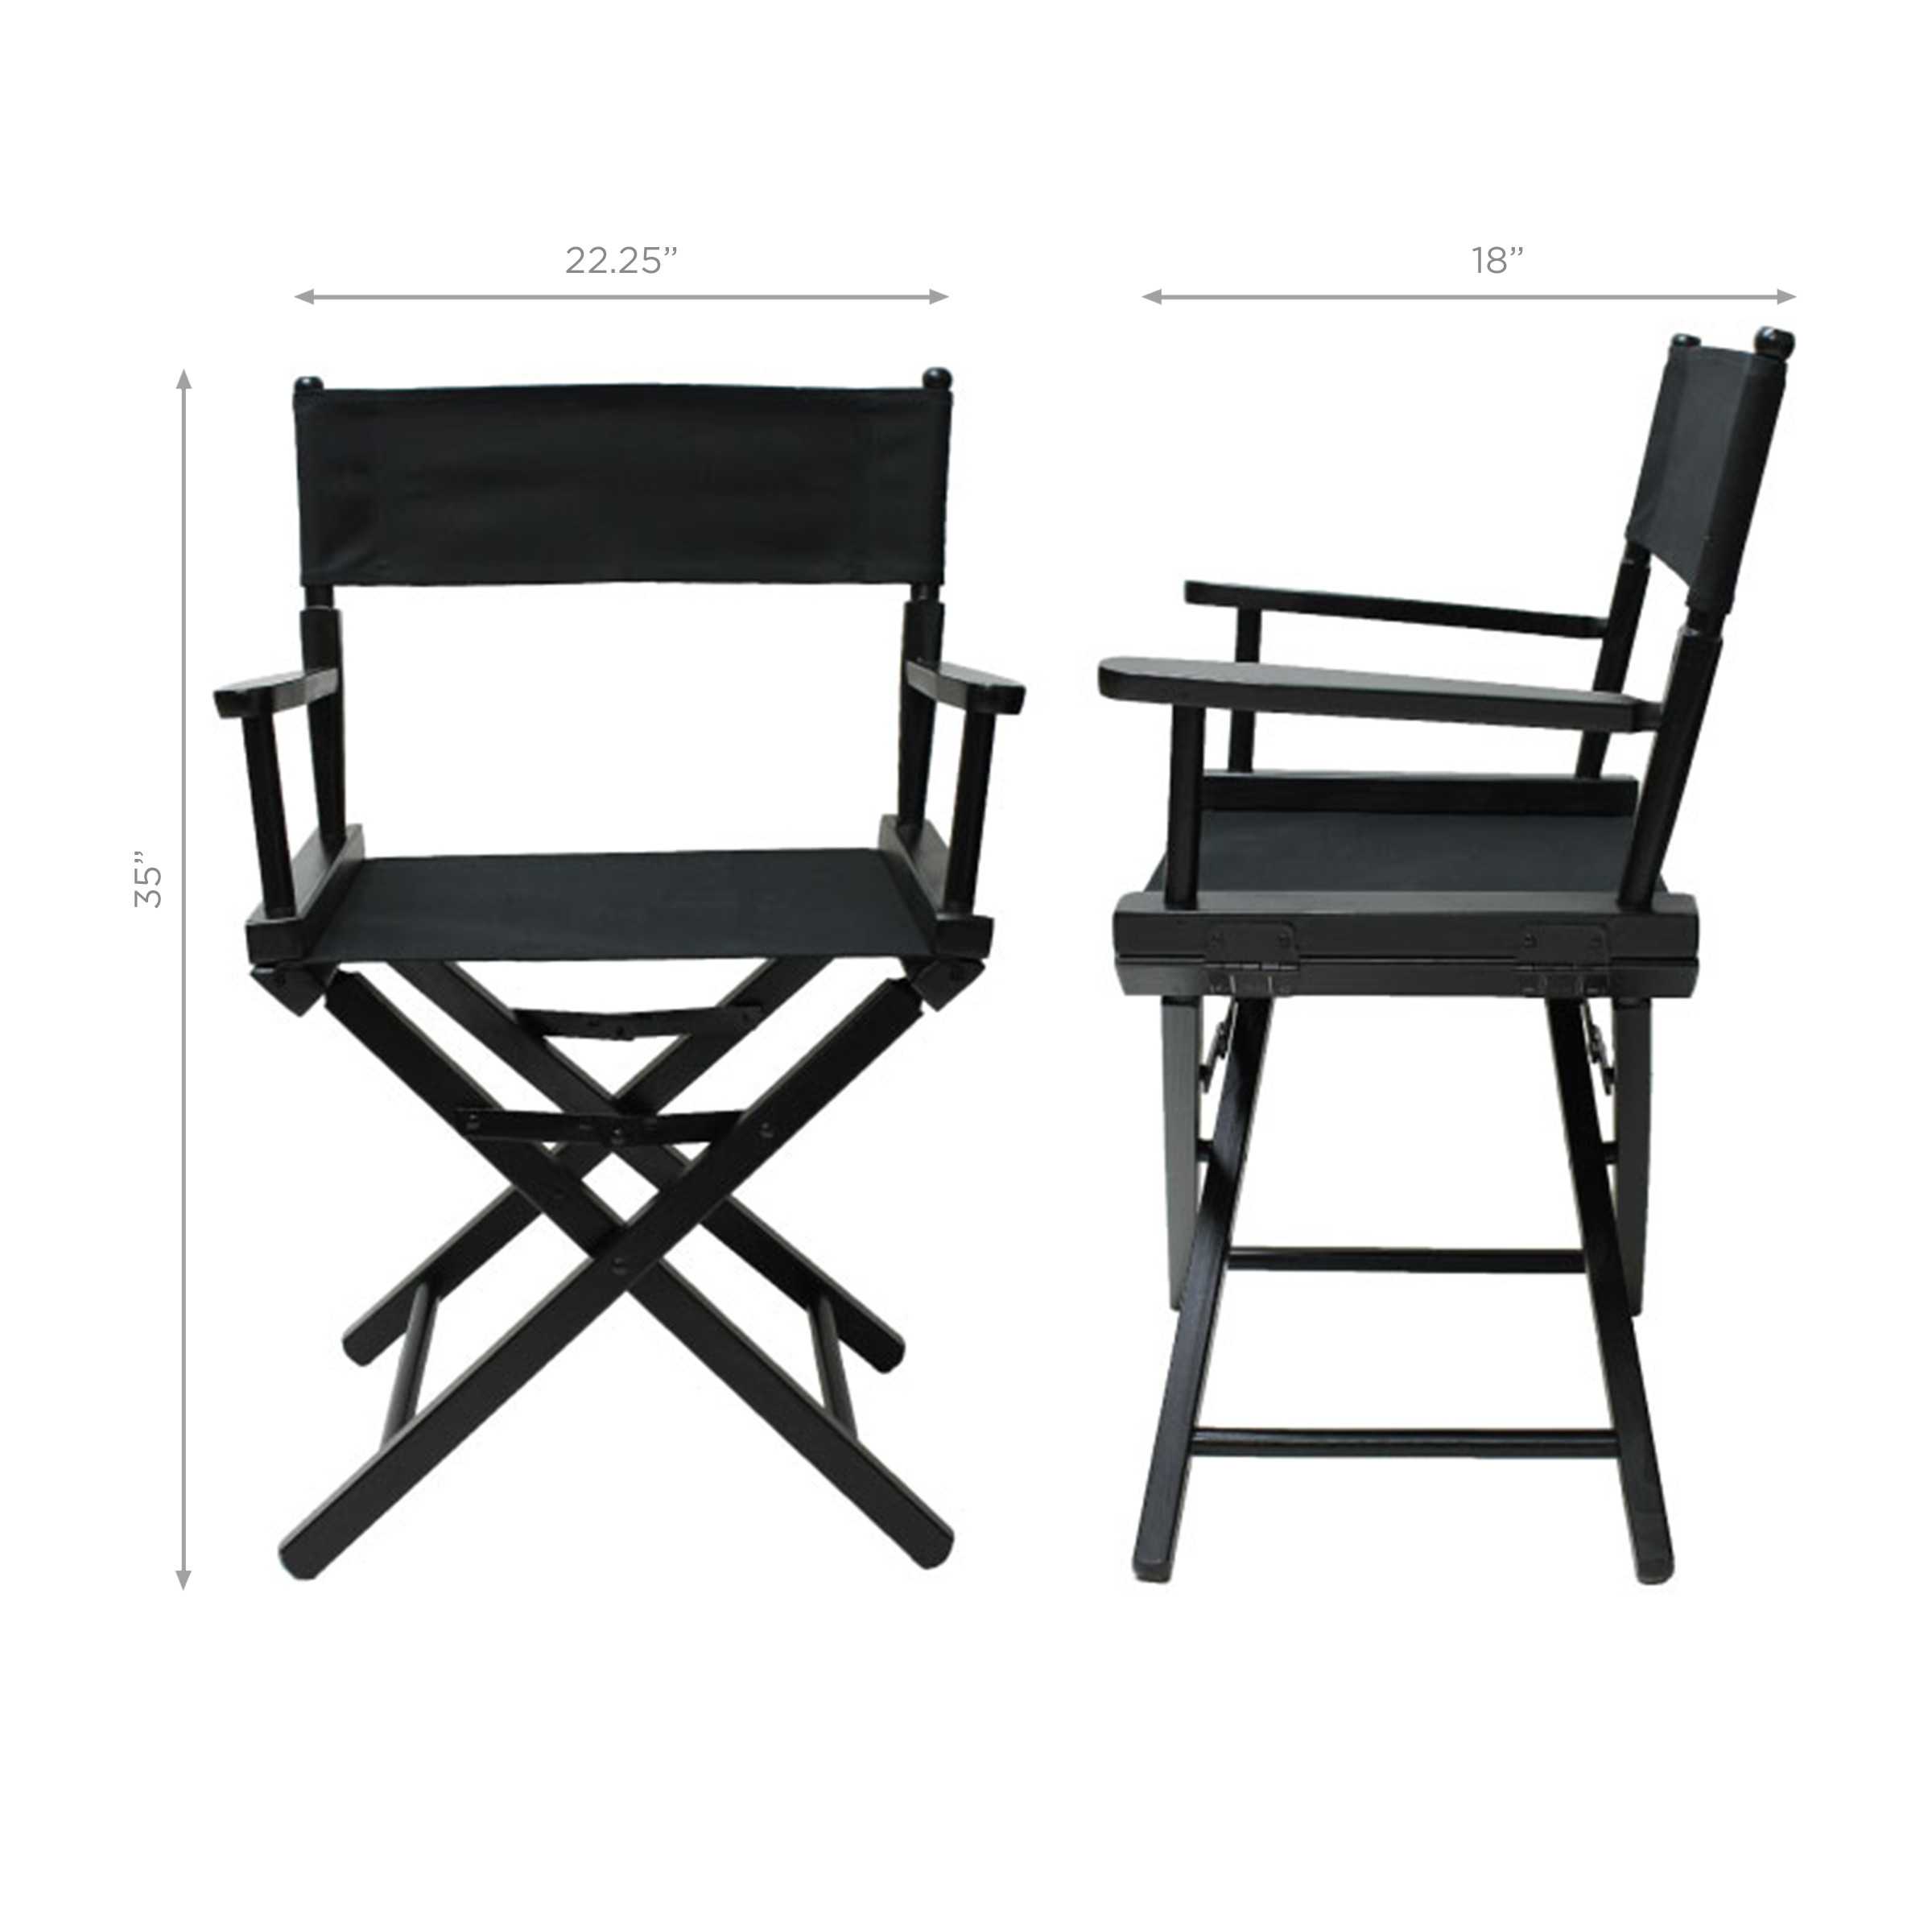 HOUSTON TEXANS TABLE HEIGHT DIRECTORS CHAIR